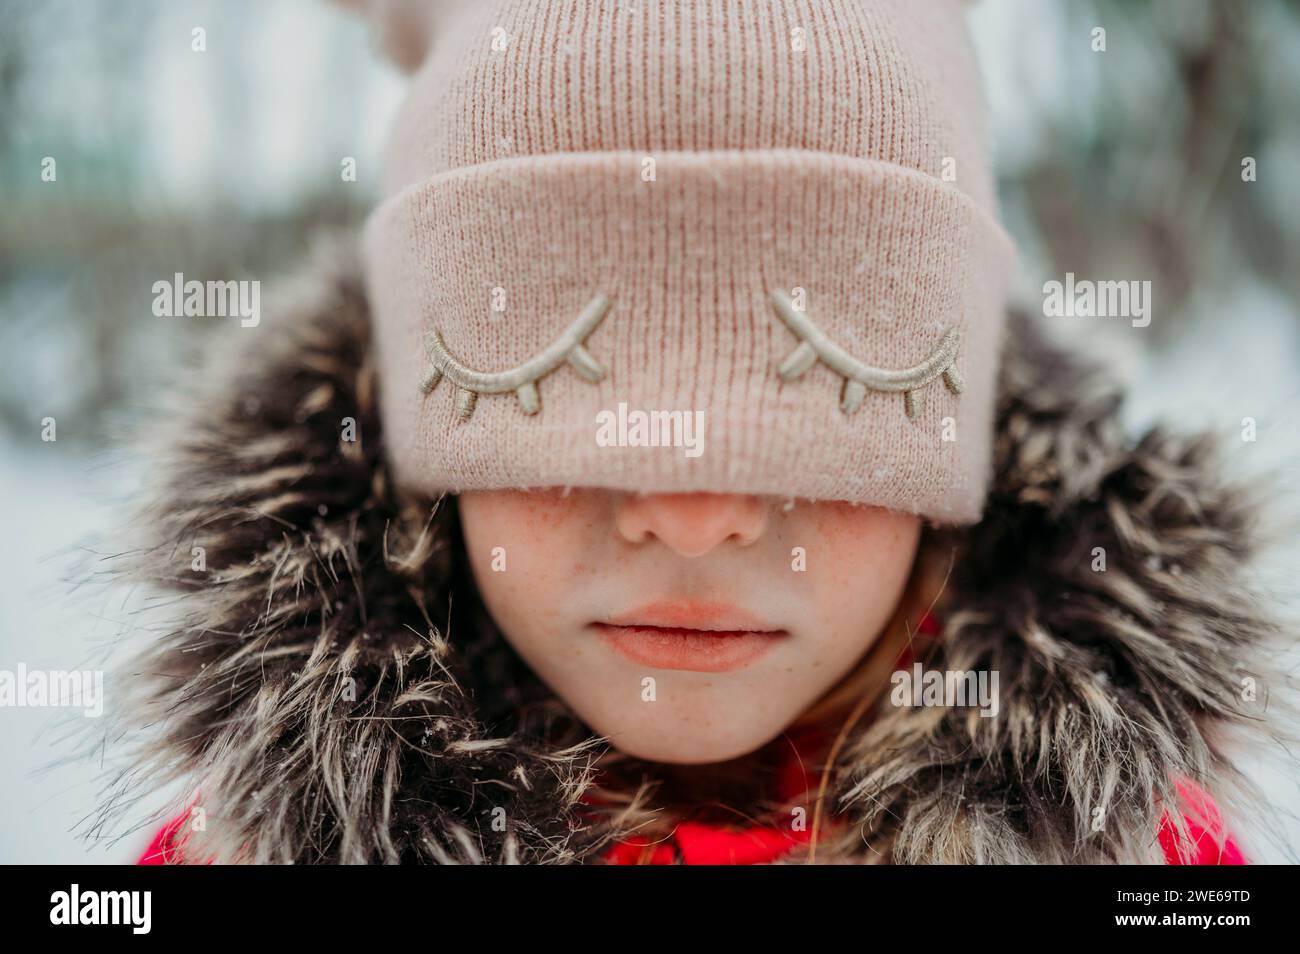 Sad girl covering eyes with pink knit hat Stock Photo